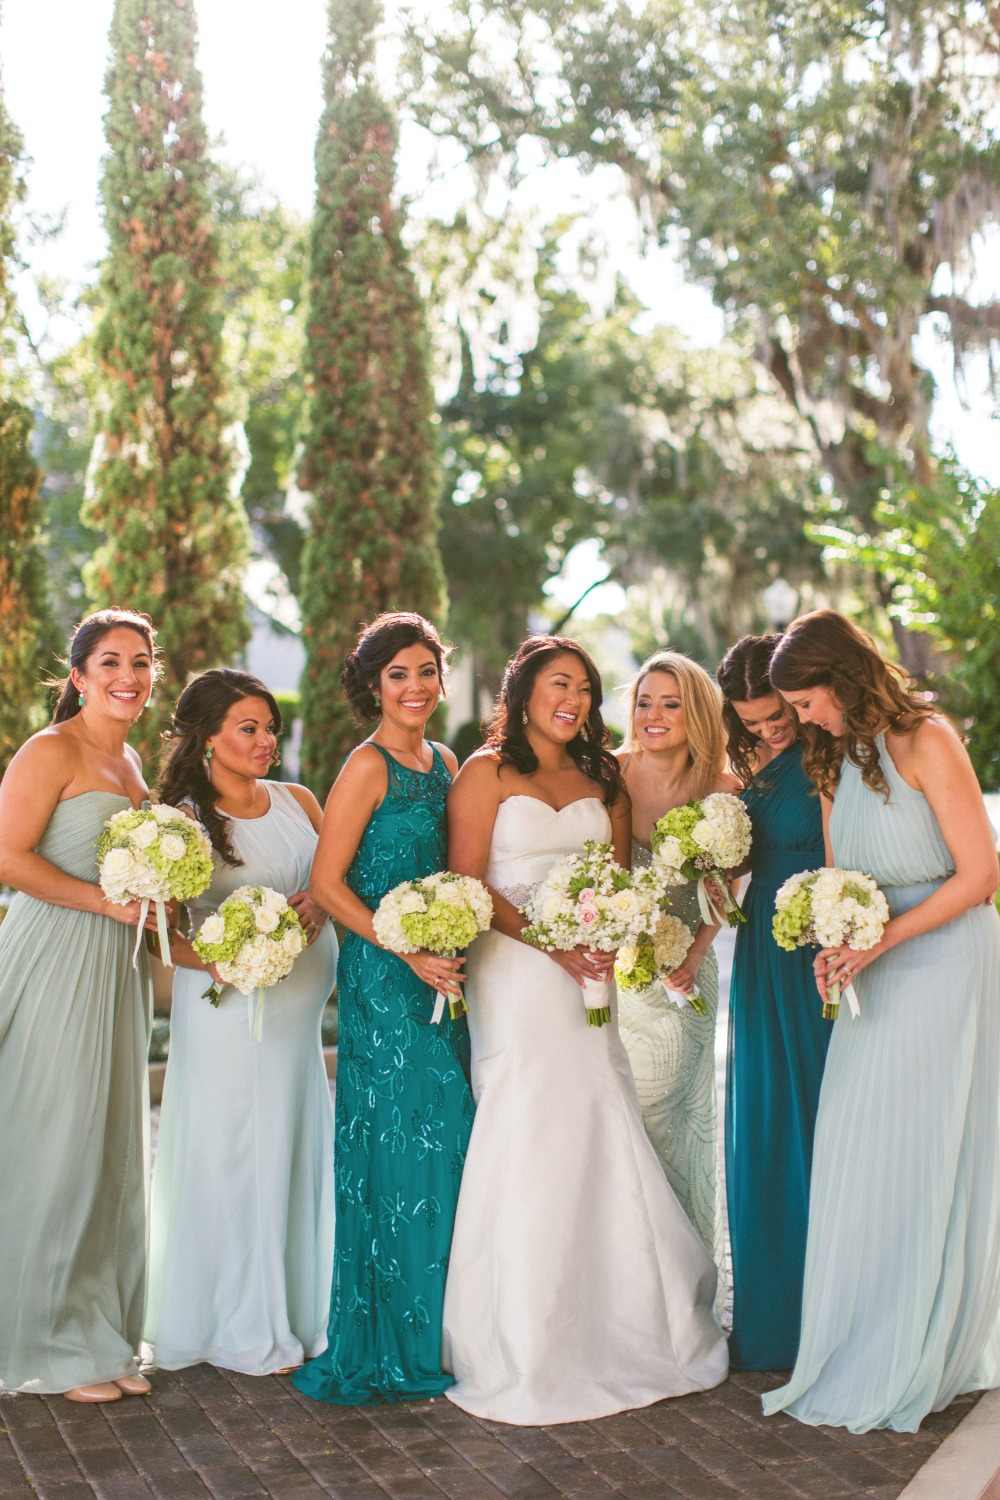 Bridesmaids in shades of teal